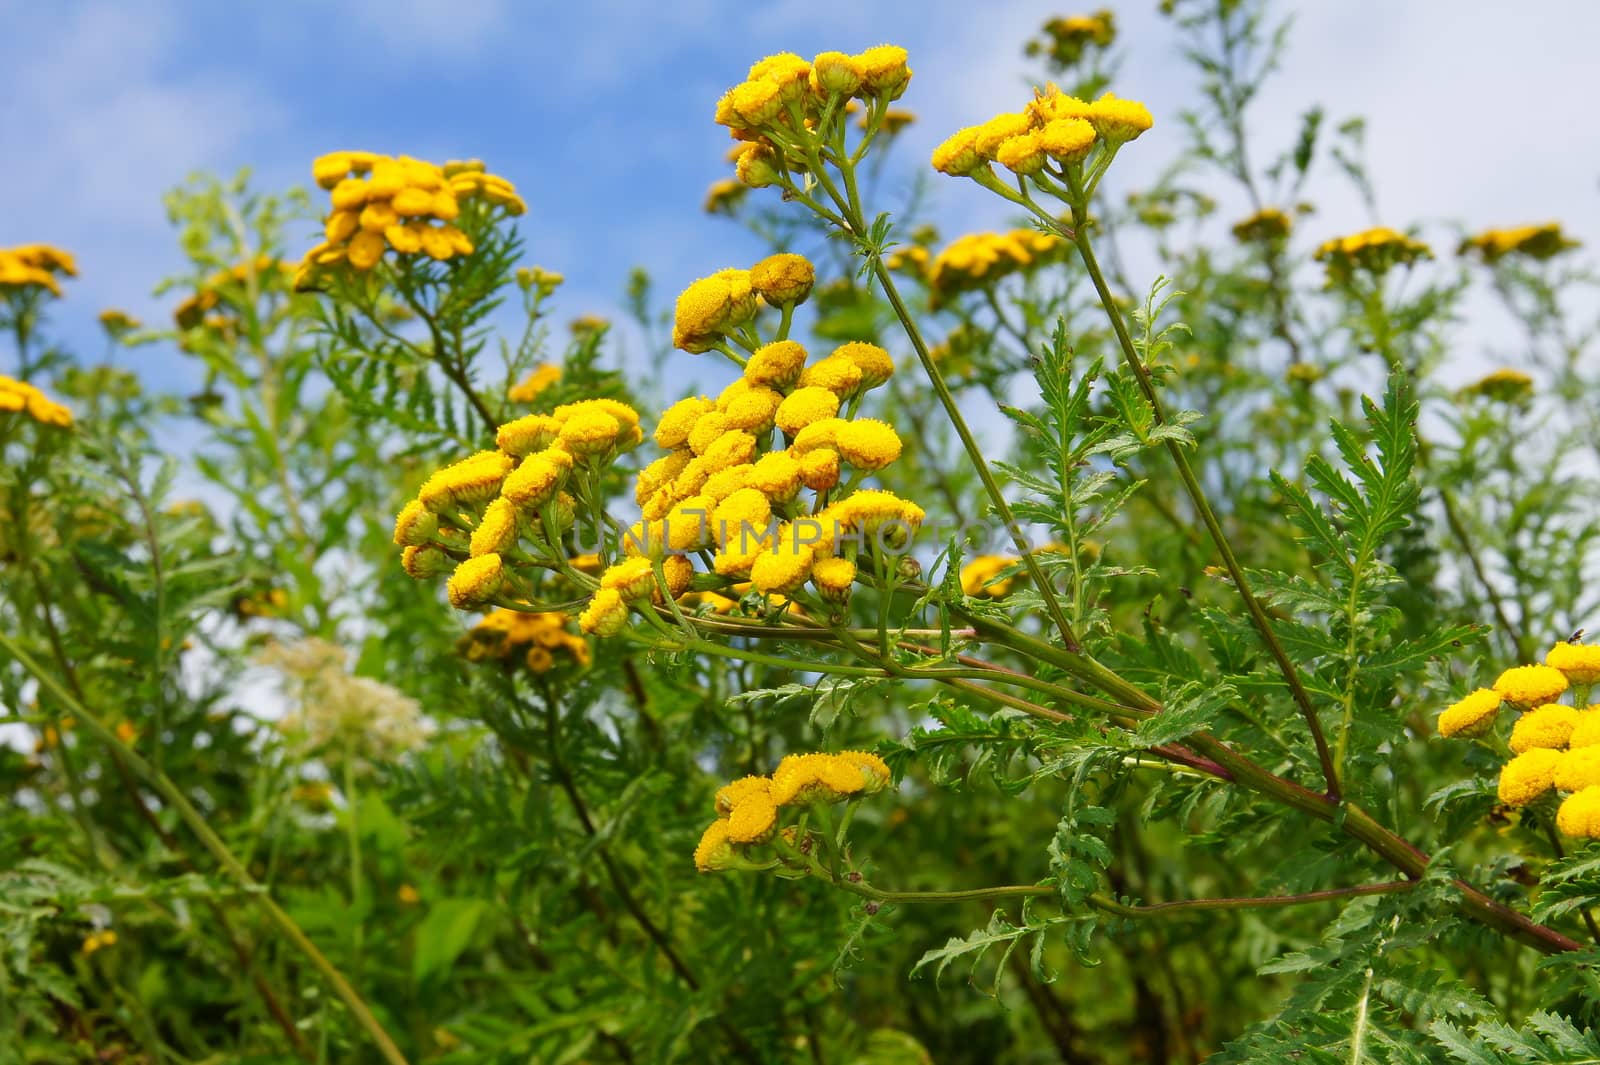 Tansy, a toxic yellow flower